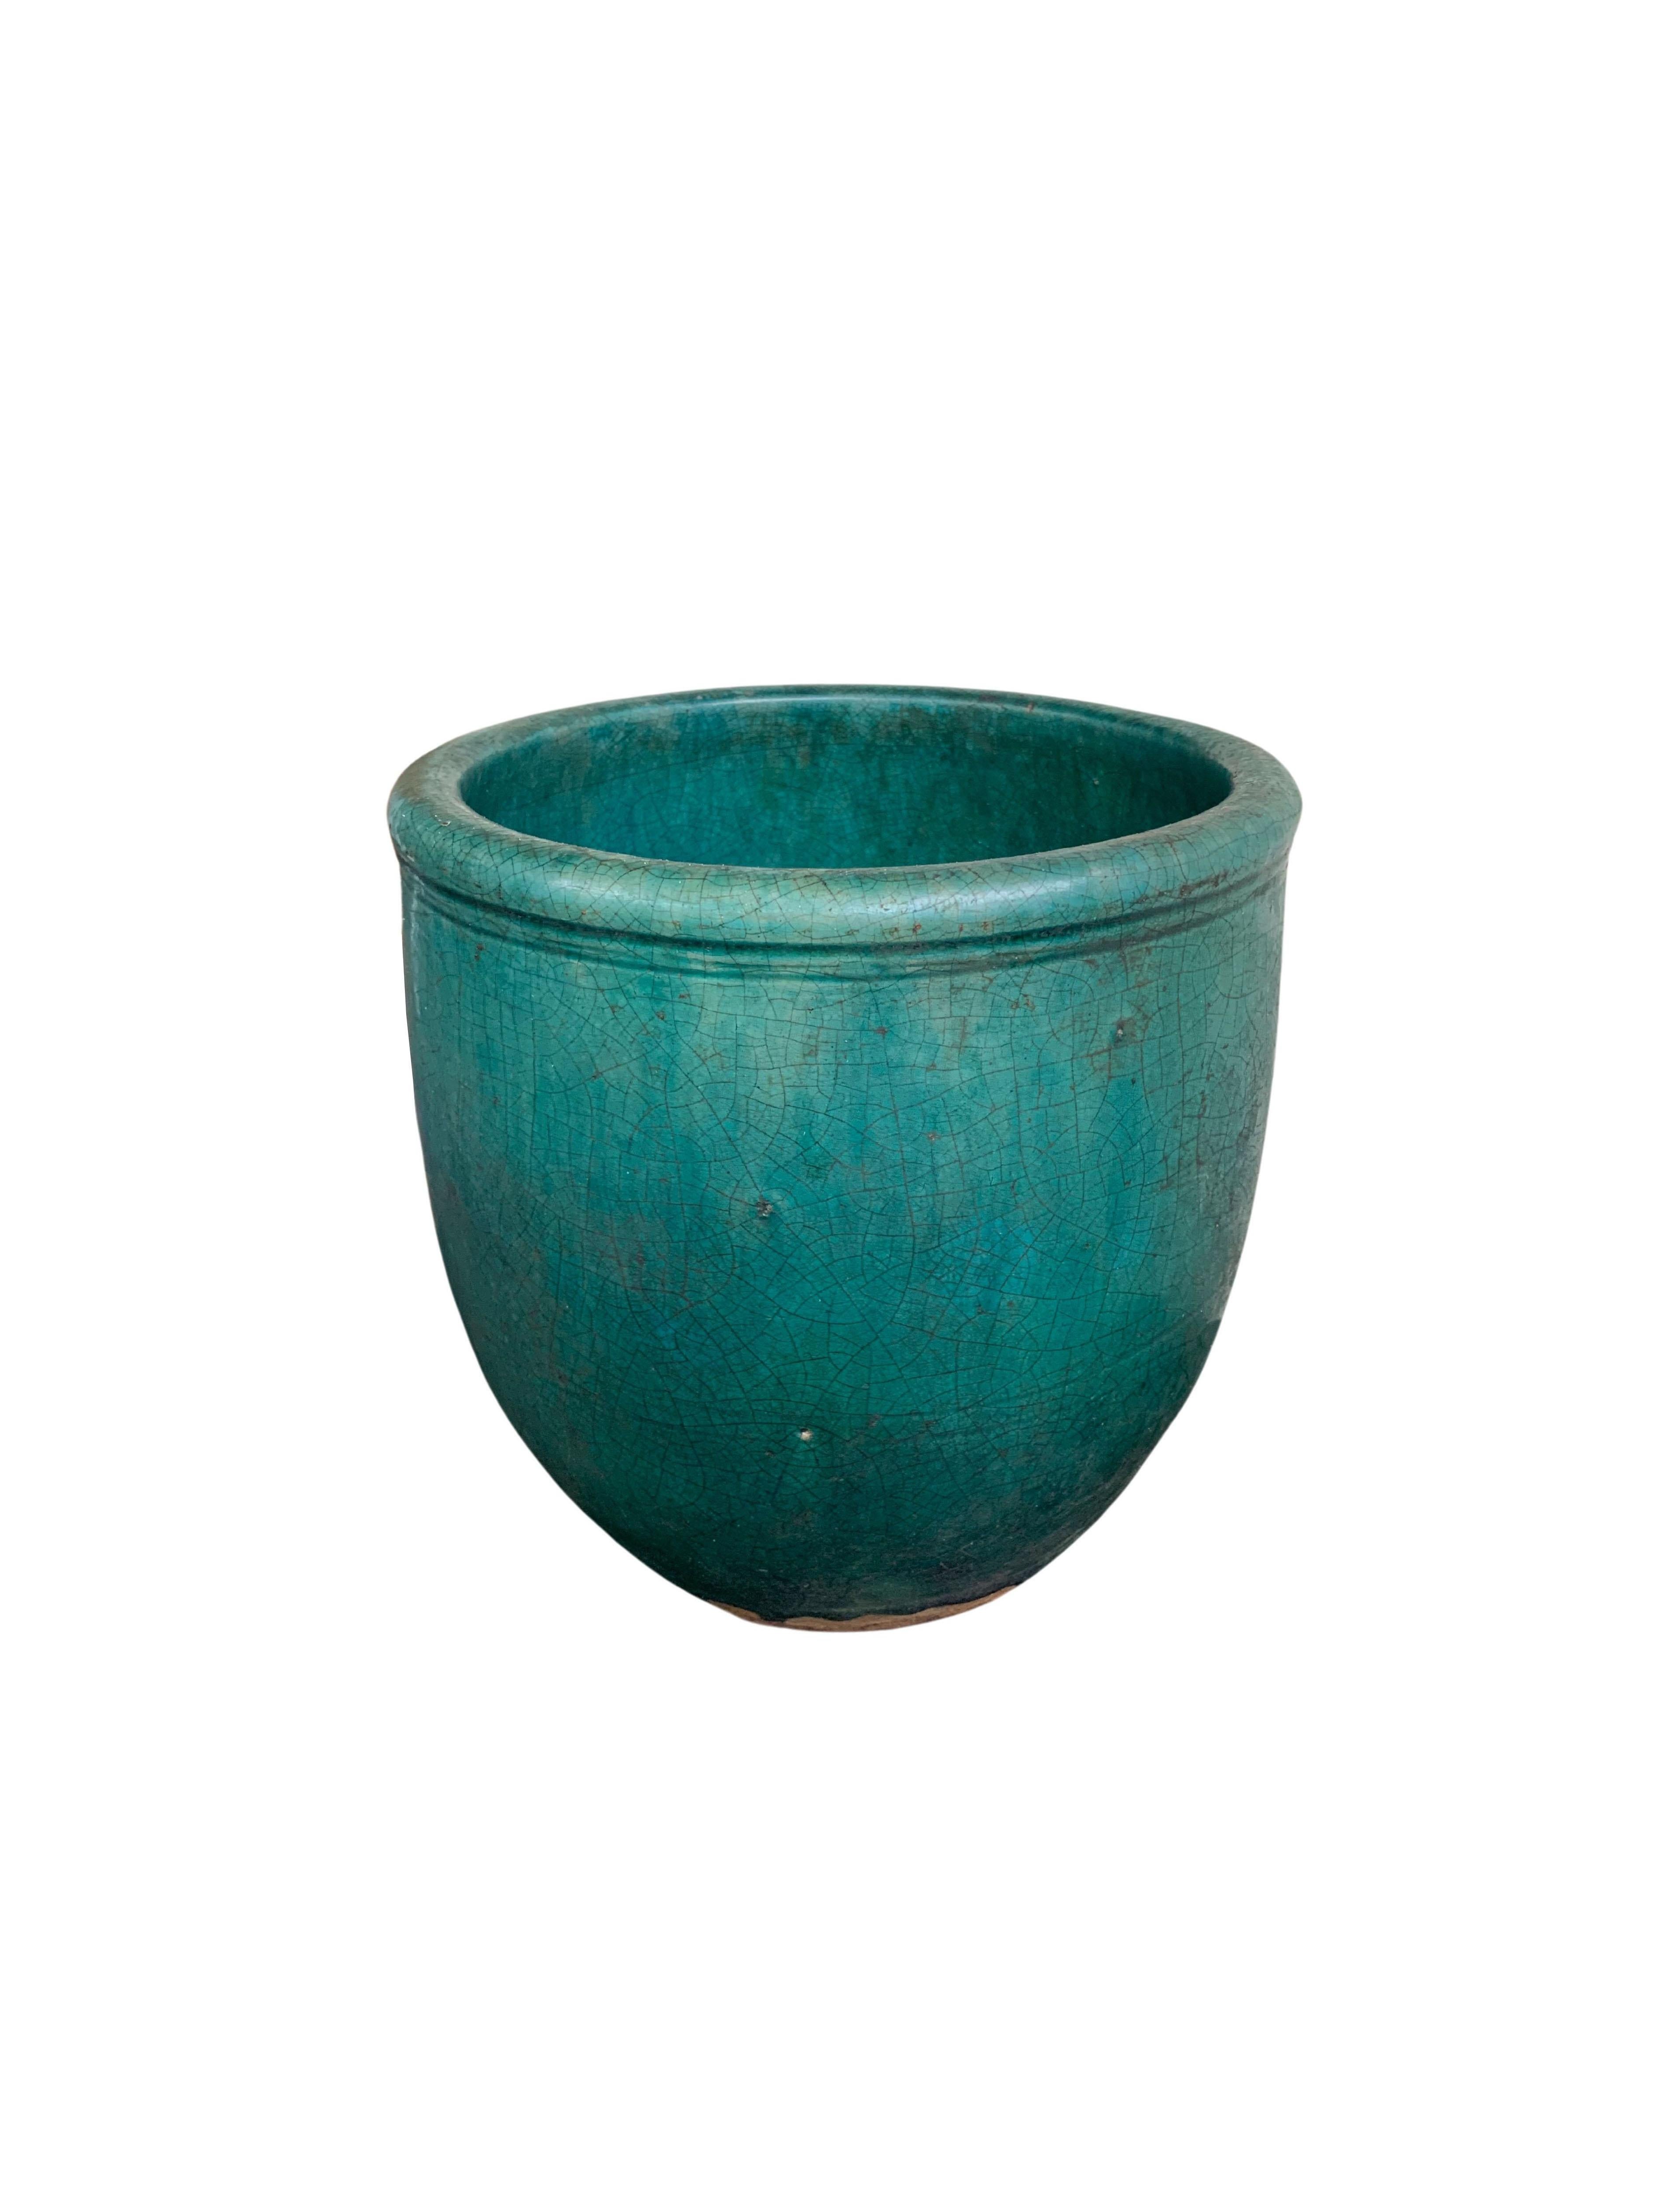 Qing Chinese Green Glazed Jar / Planter, c. 1900 For Sale